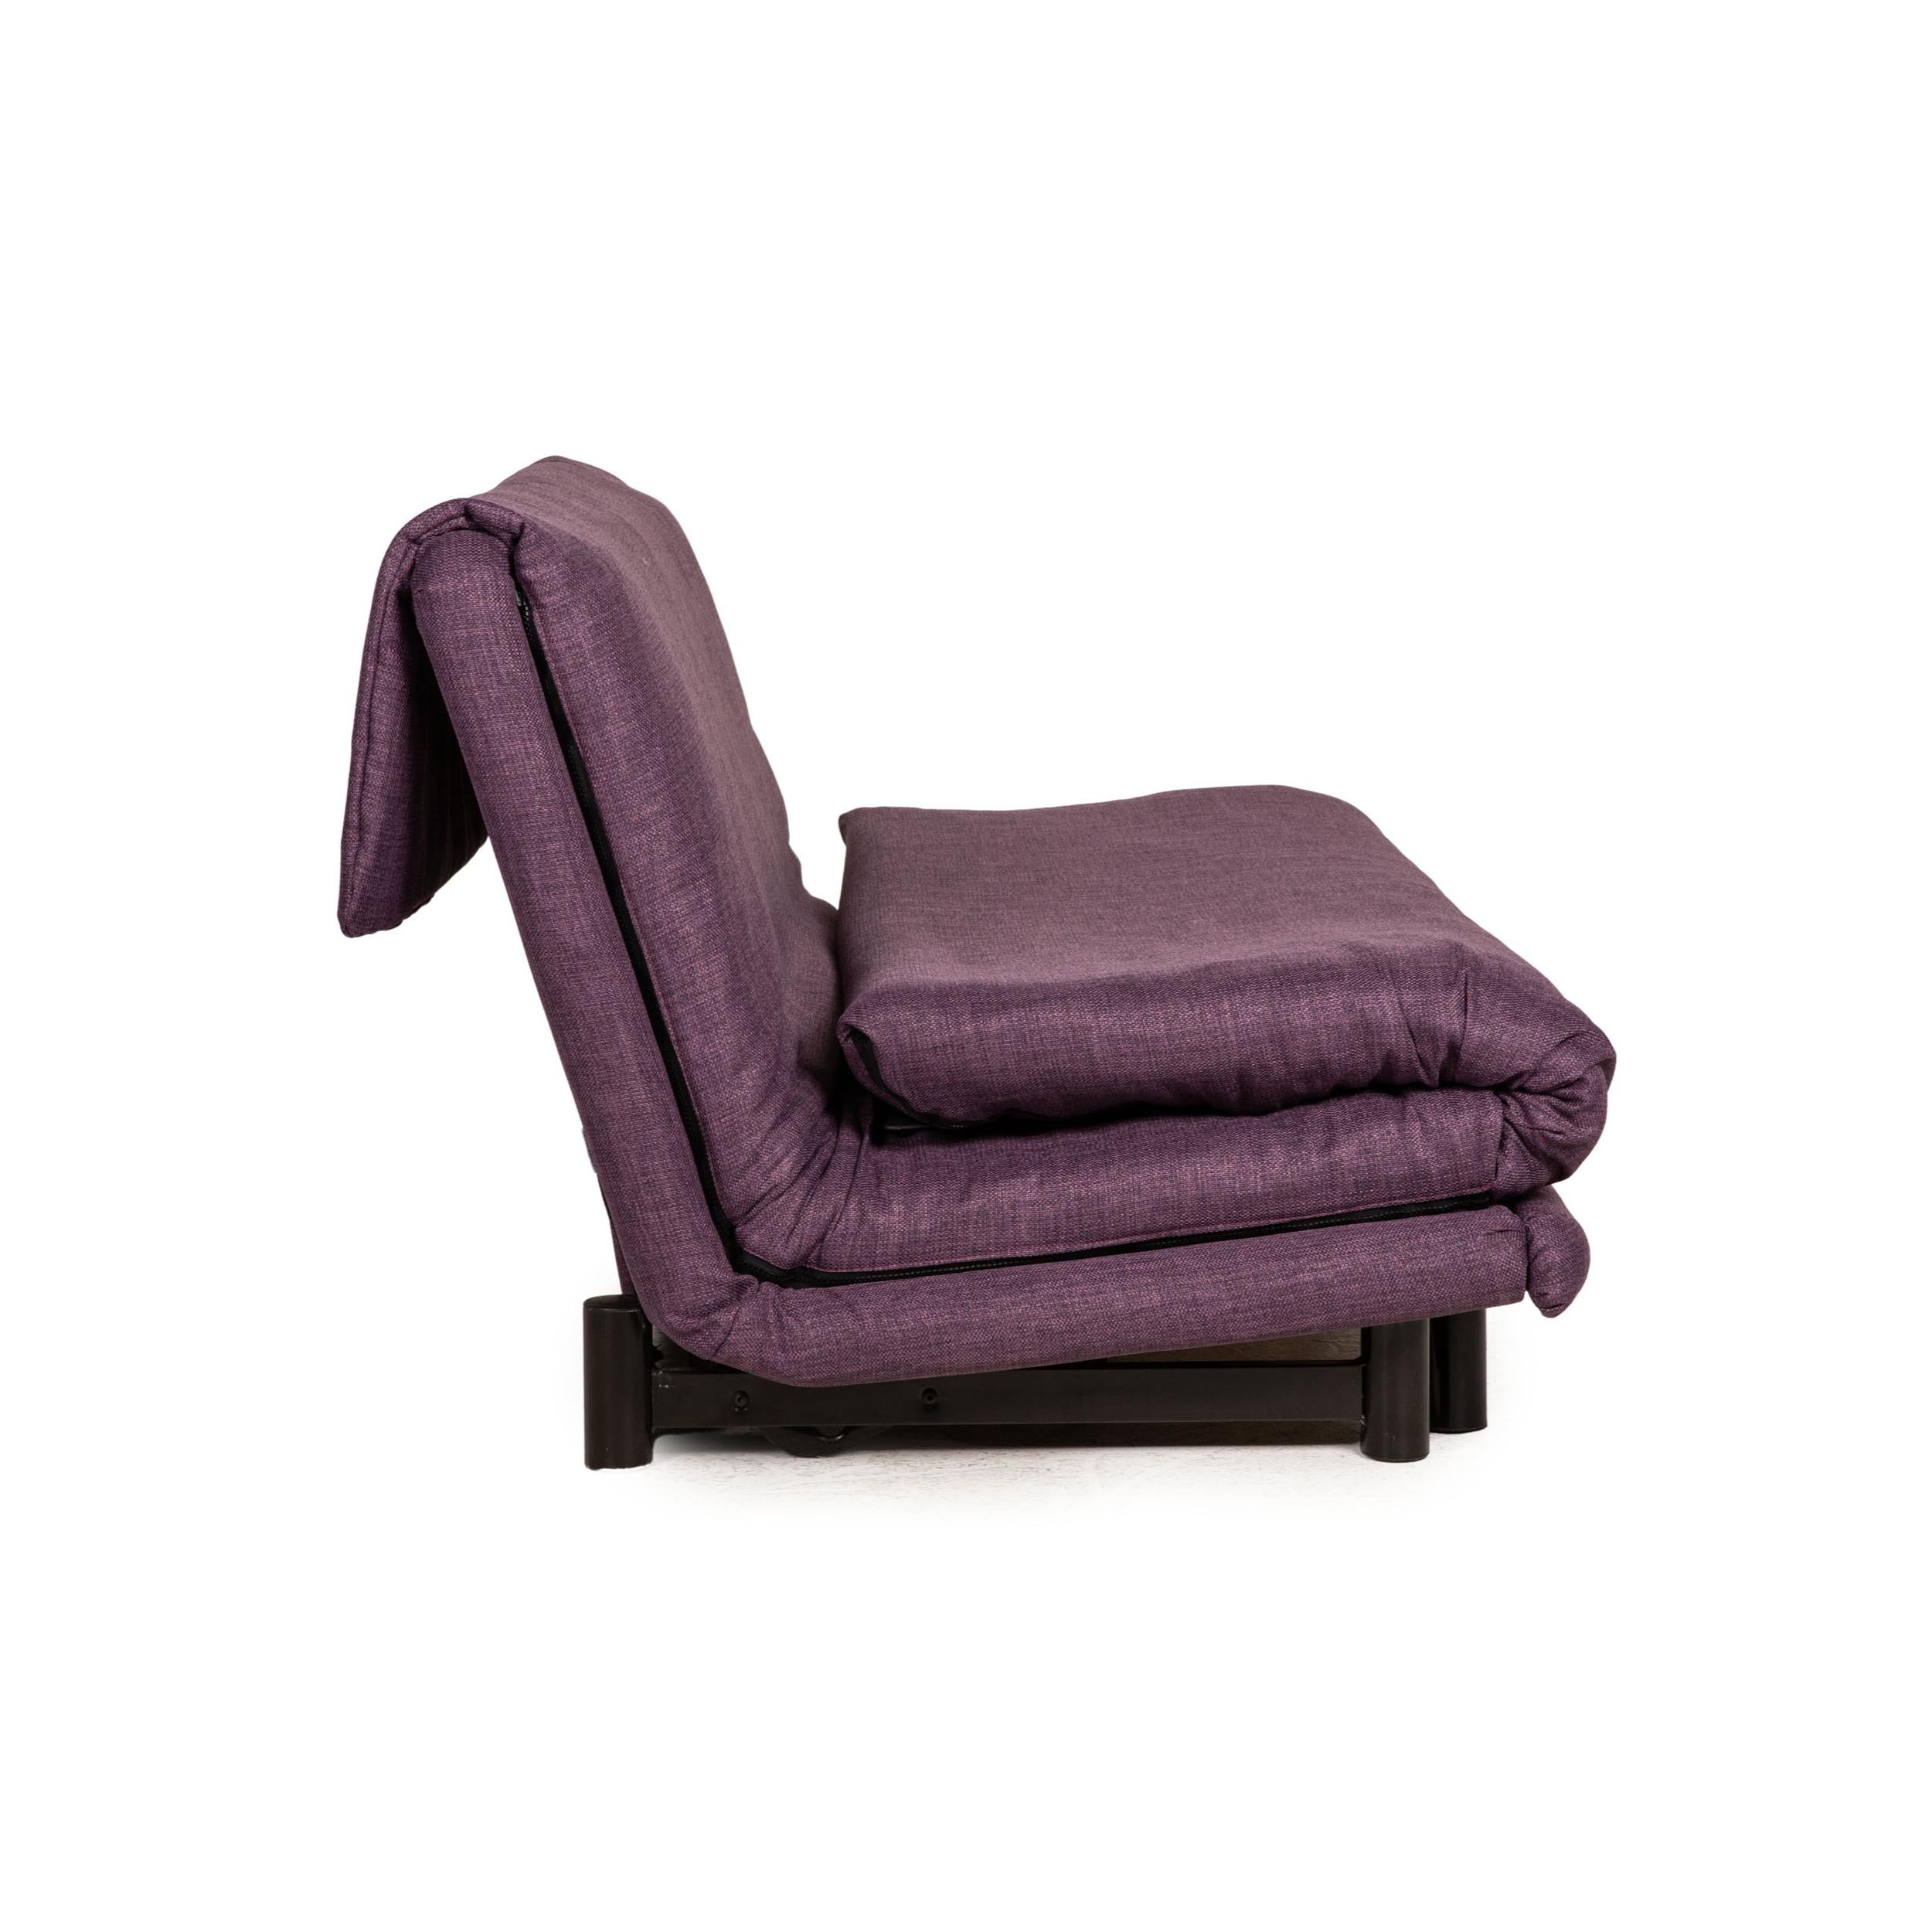 Ligne Roset Multy Fabric Sofa Purple Three-Seater Couch Function Sleeping For Sale 1